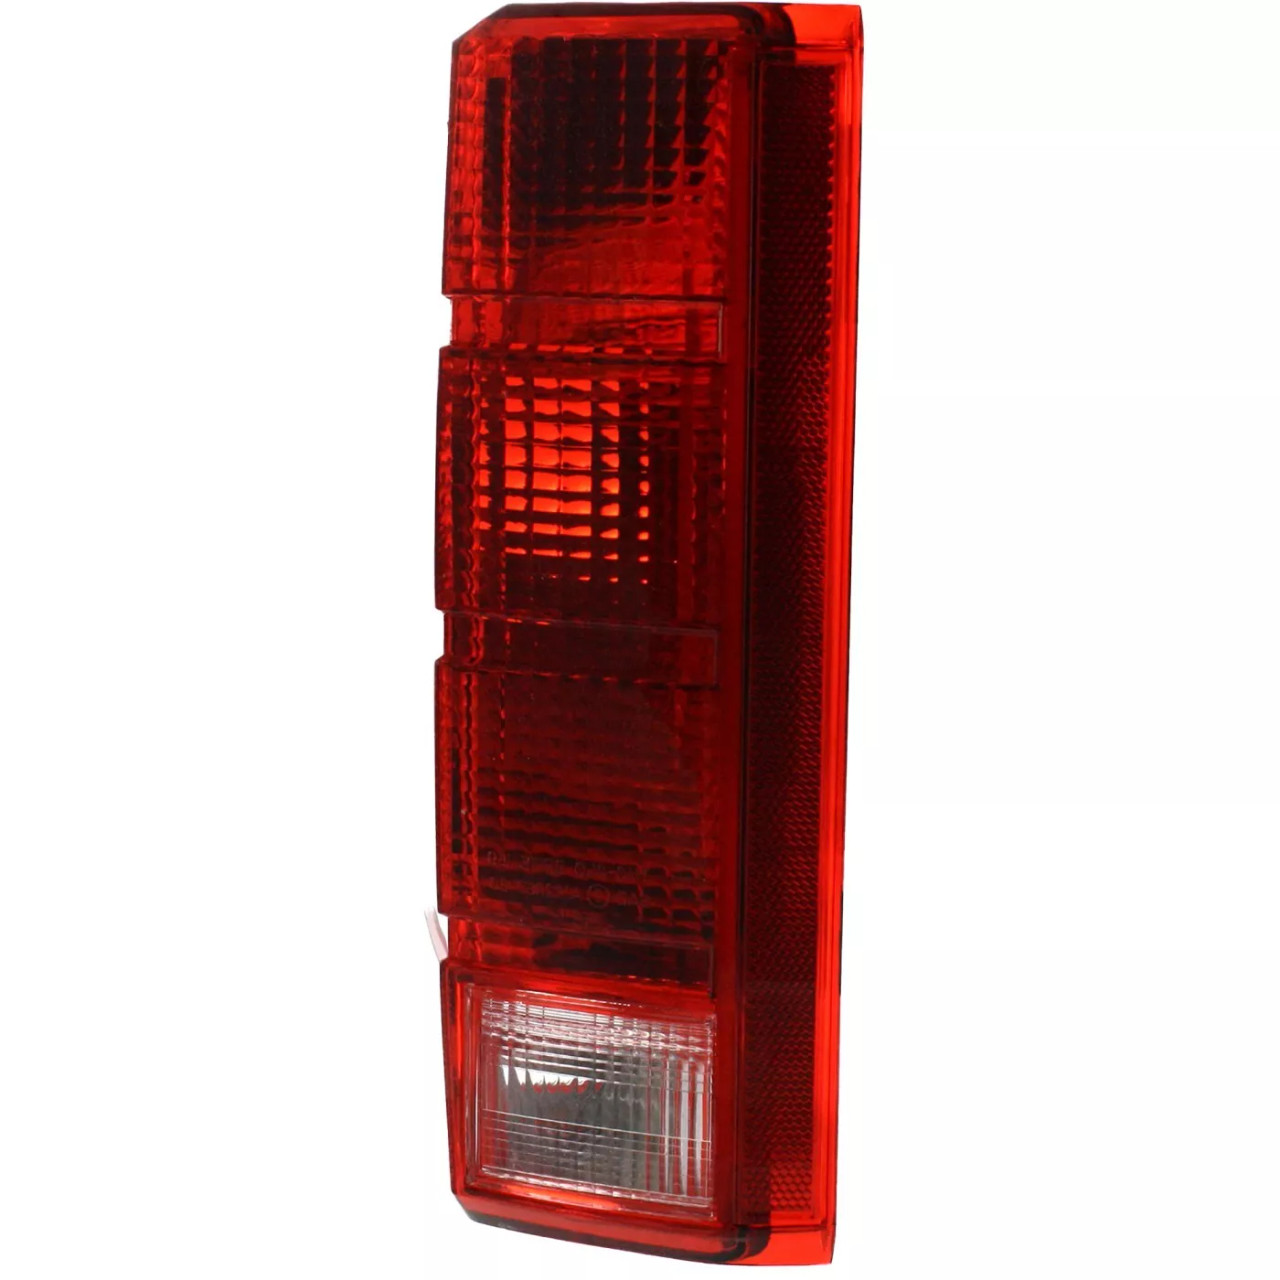 2Pc Tail Light Set For 1980-1986 Ford F-150 F-250 F-350 Bronco 80-83 F-100